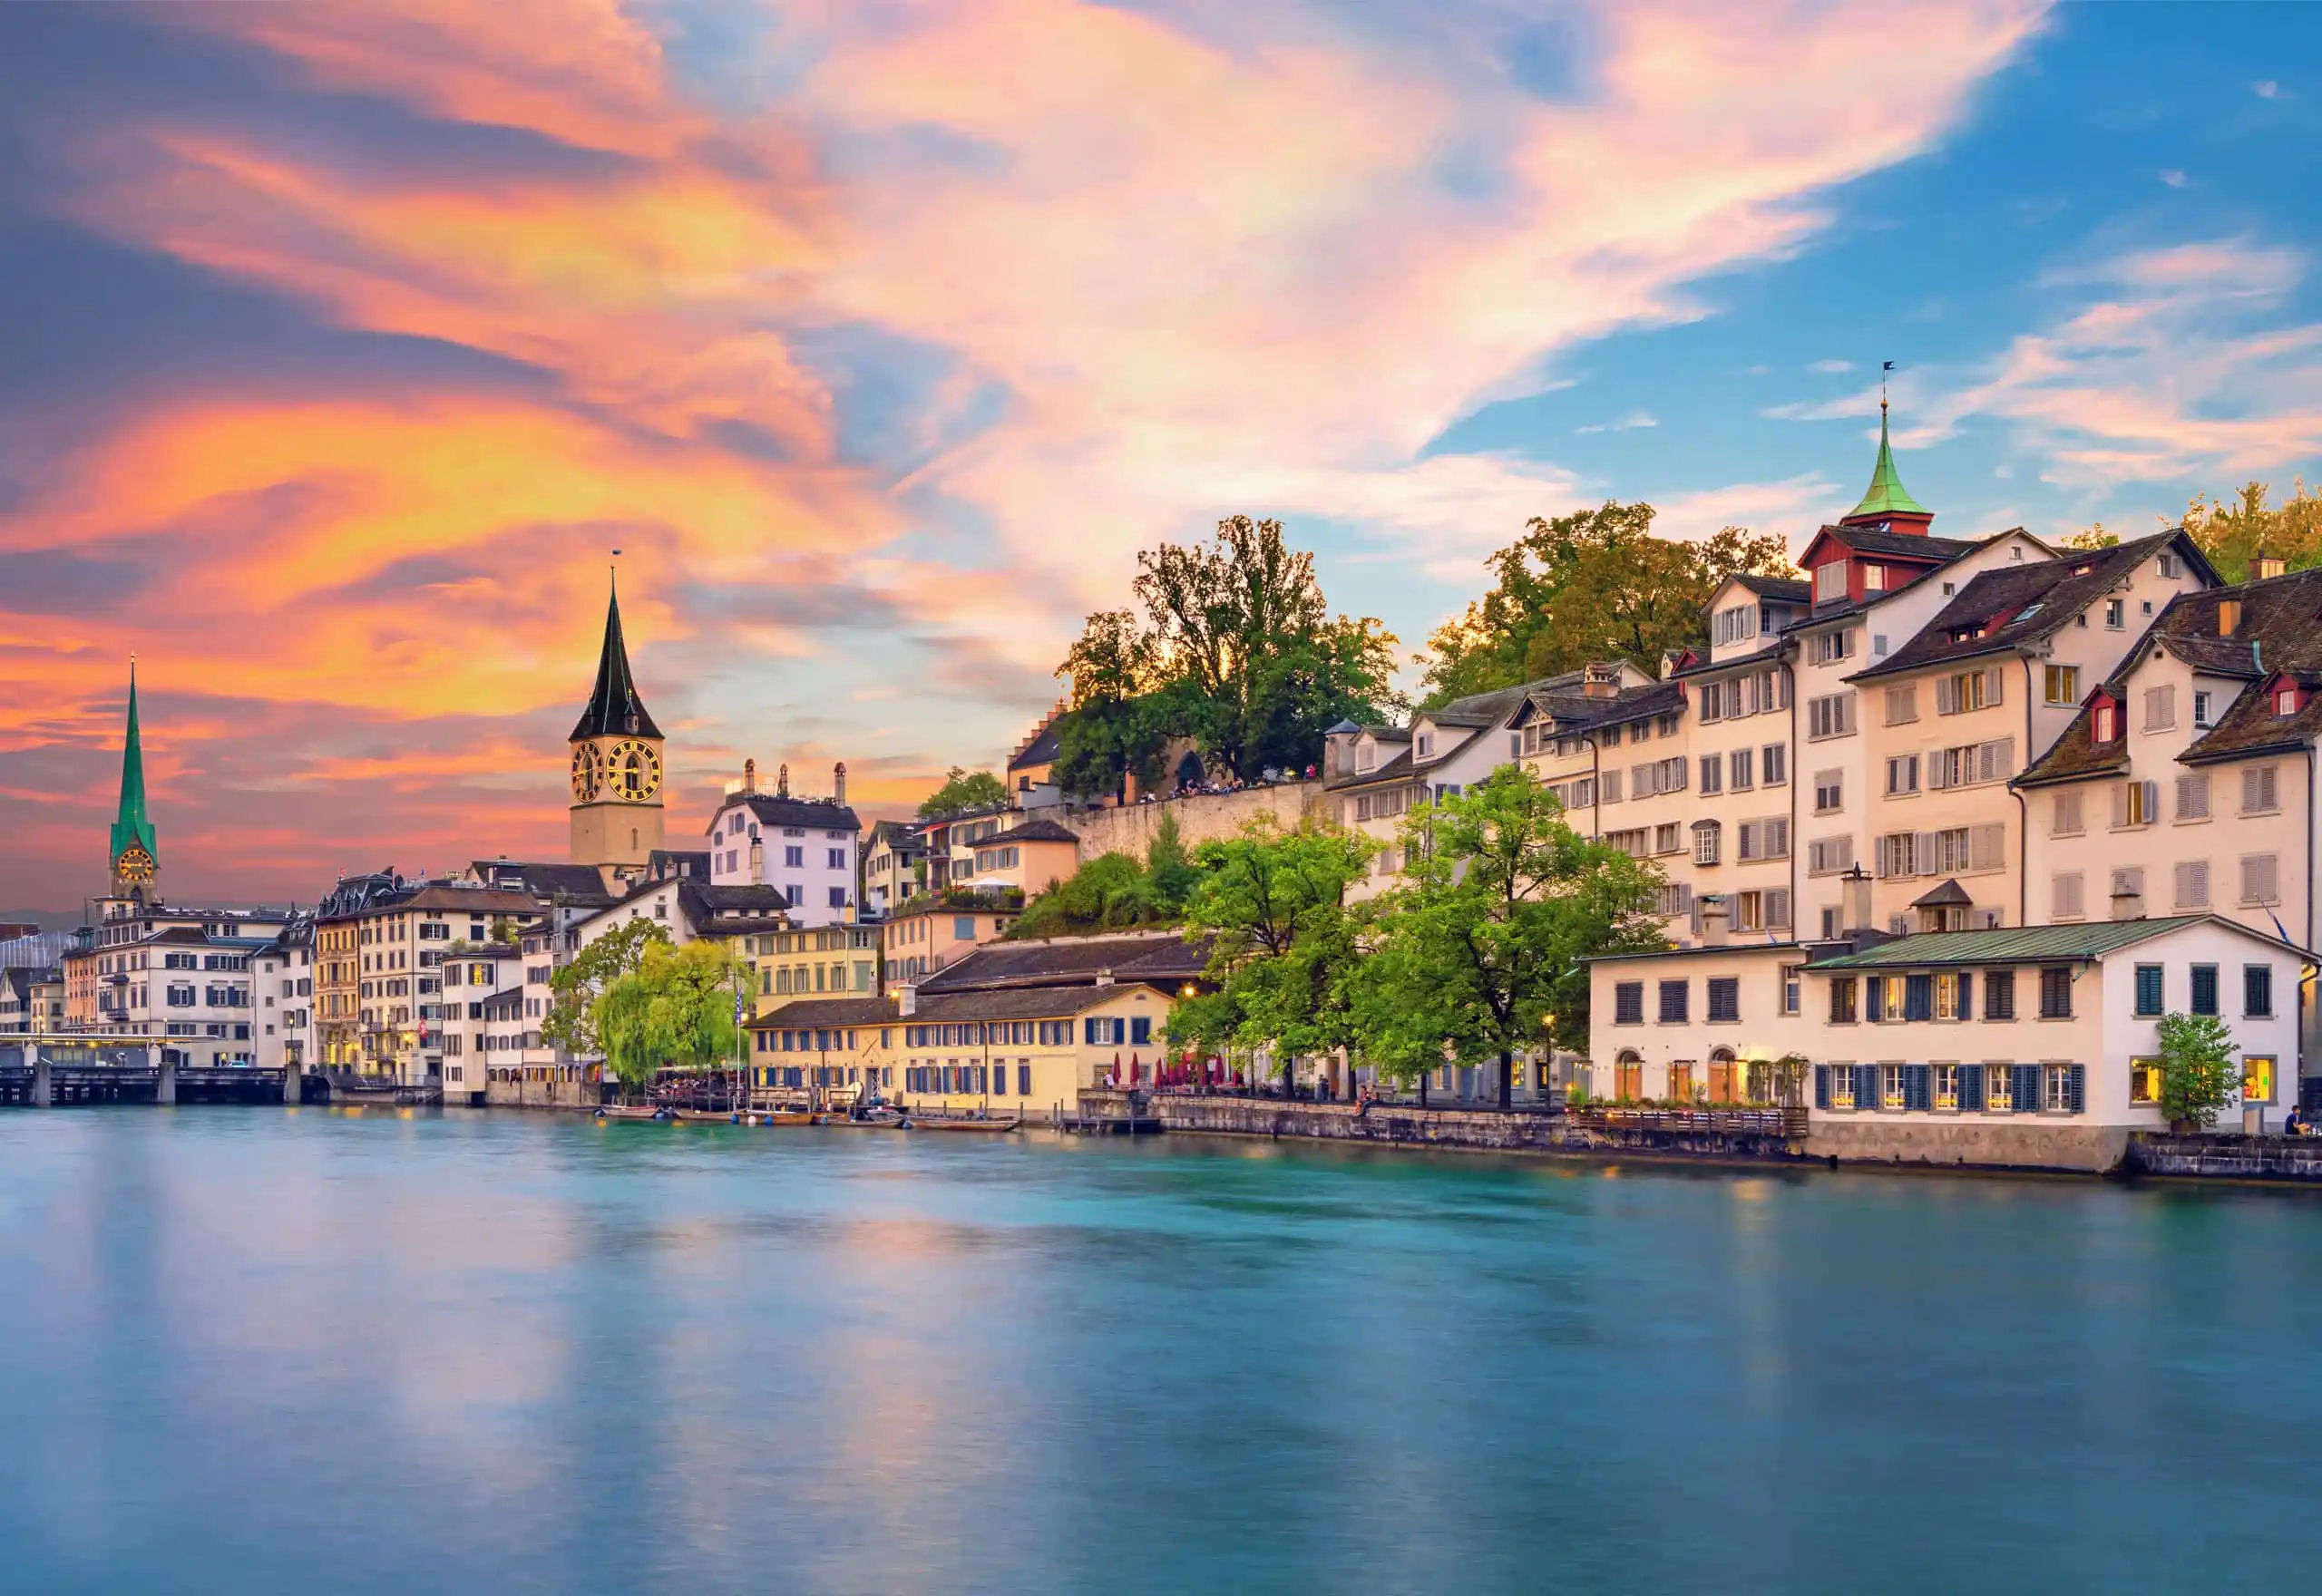 Oil and Gas Training Courses in Zurich